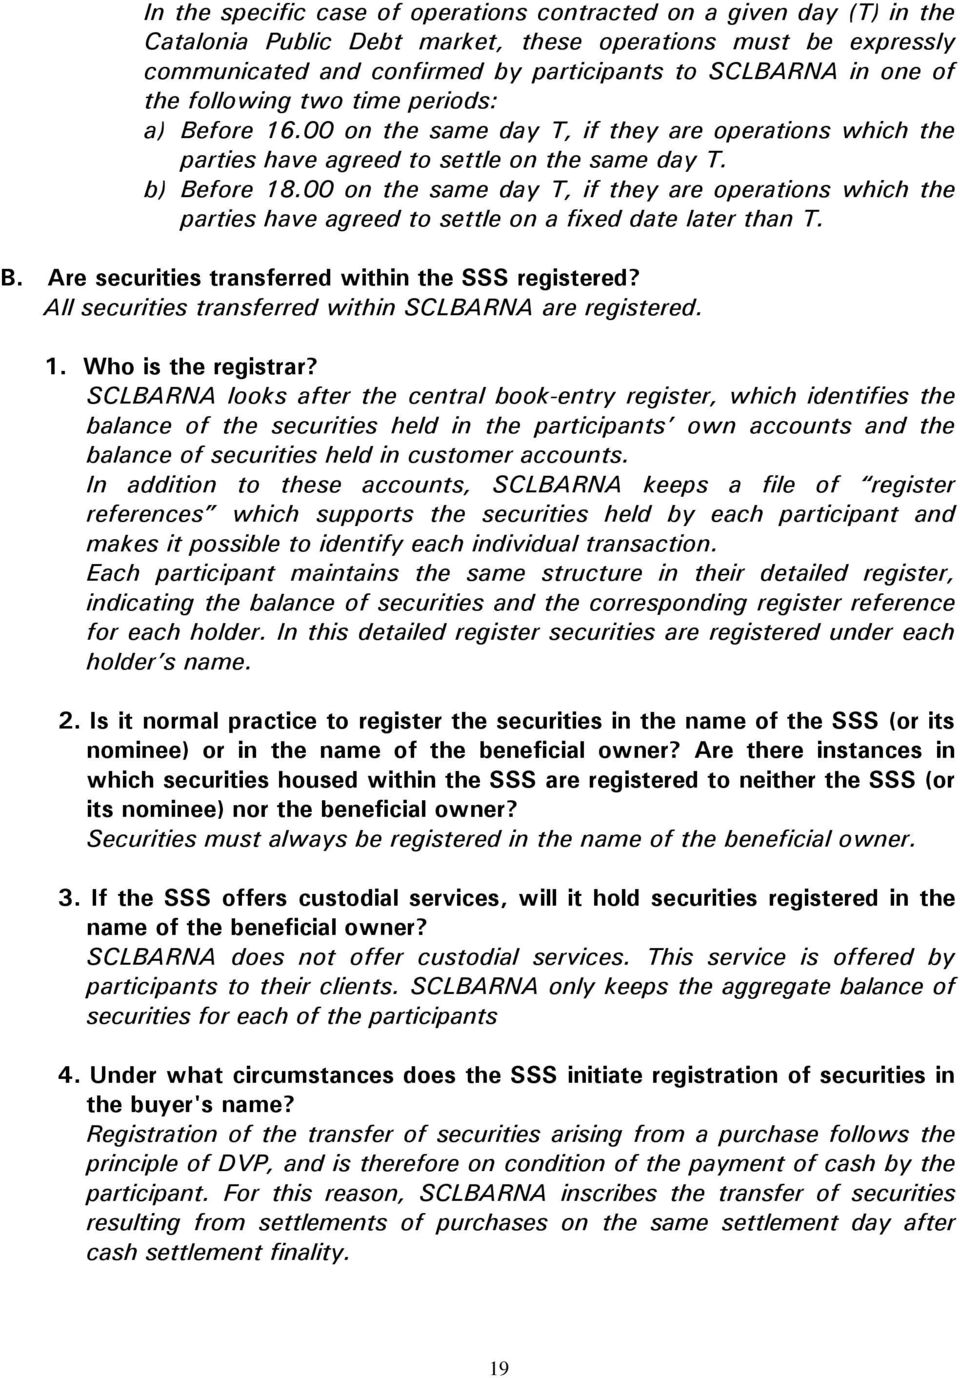 00 on the same day T, if they are operations which the parties have agreed to settle on a fixed date later than T. B. Are securities transferred within the SSS registered?